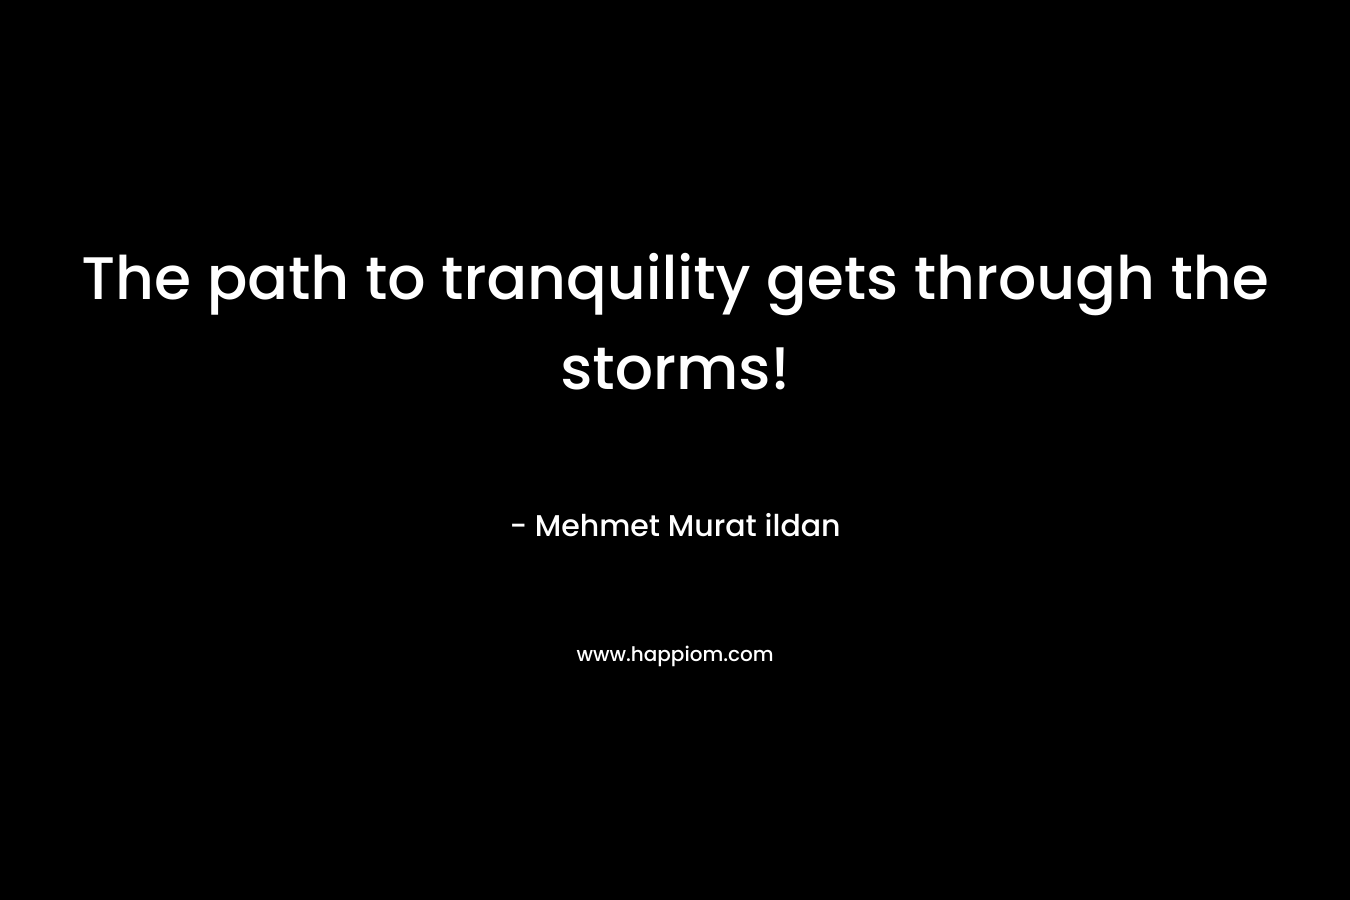 The path to tranquility gets through the storms! – Mehmet Murat ildan